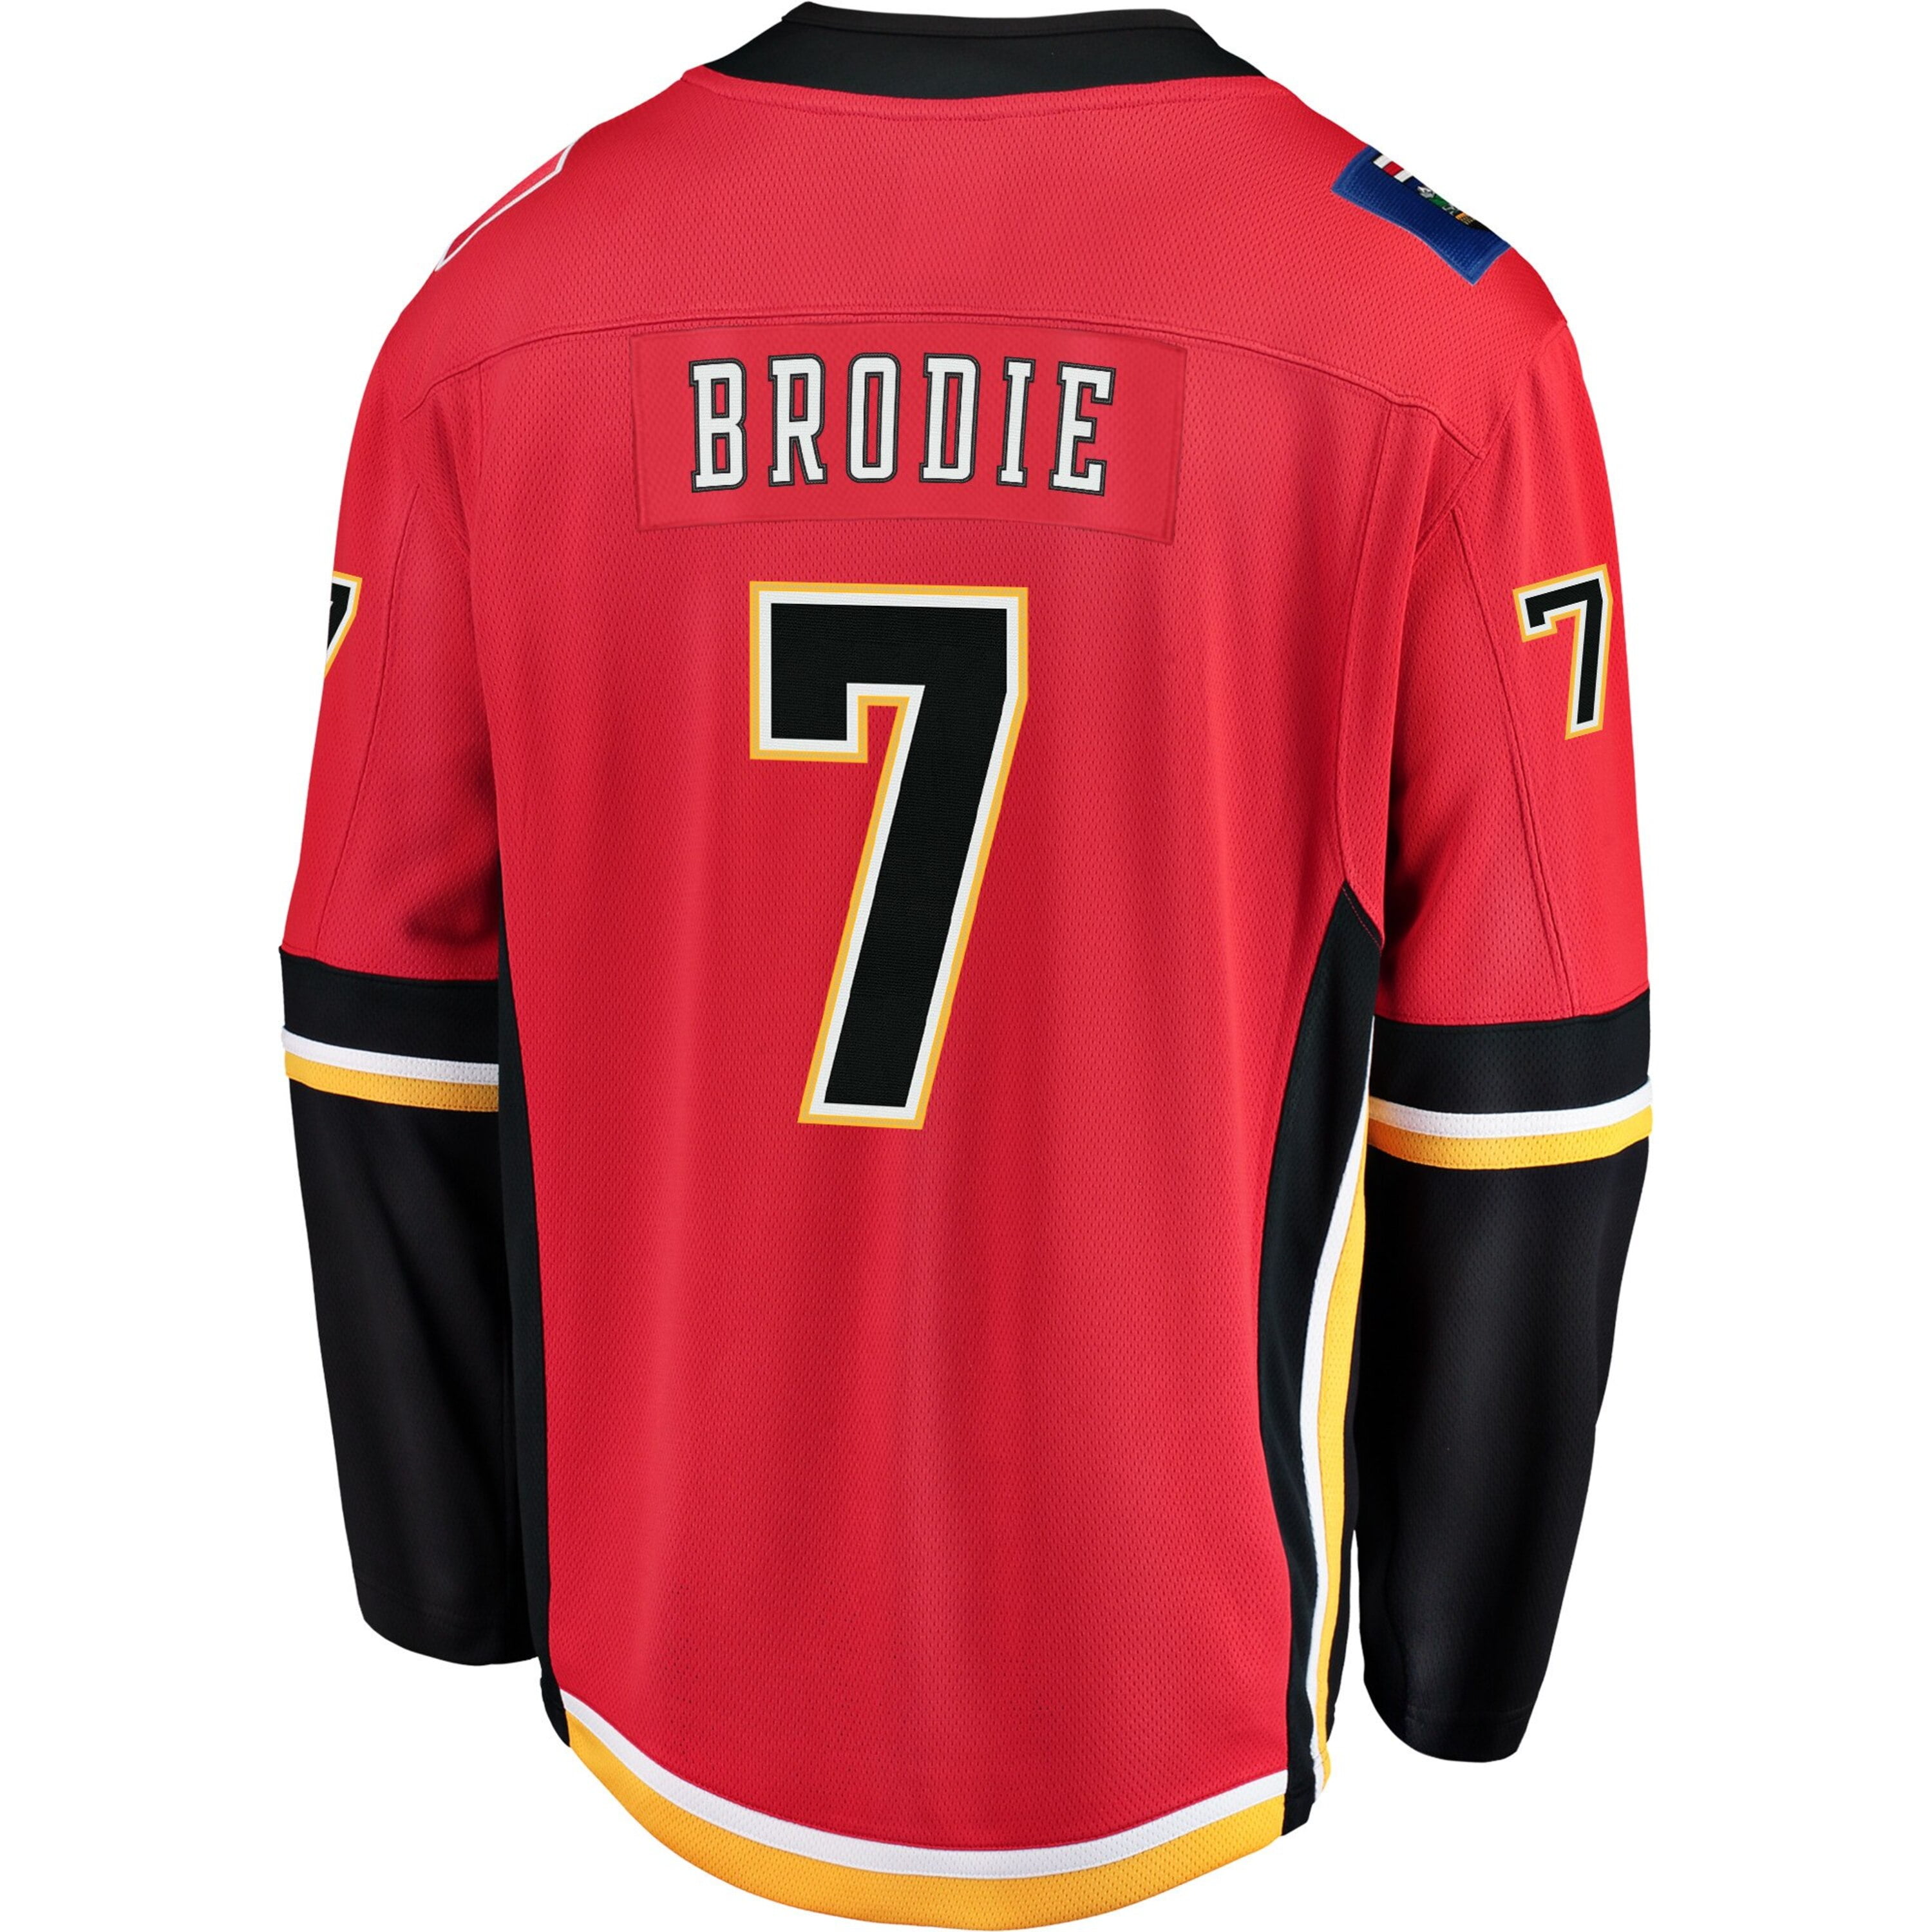 brodie jersey